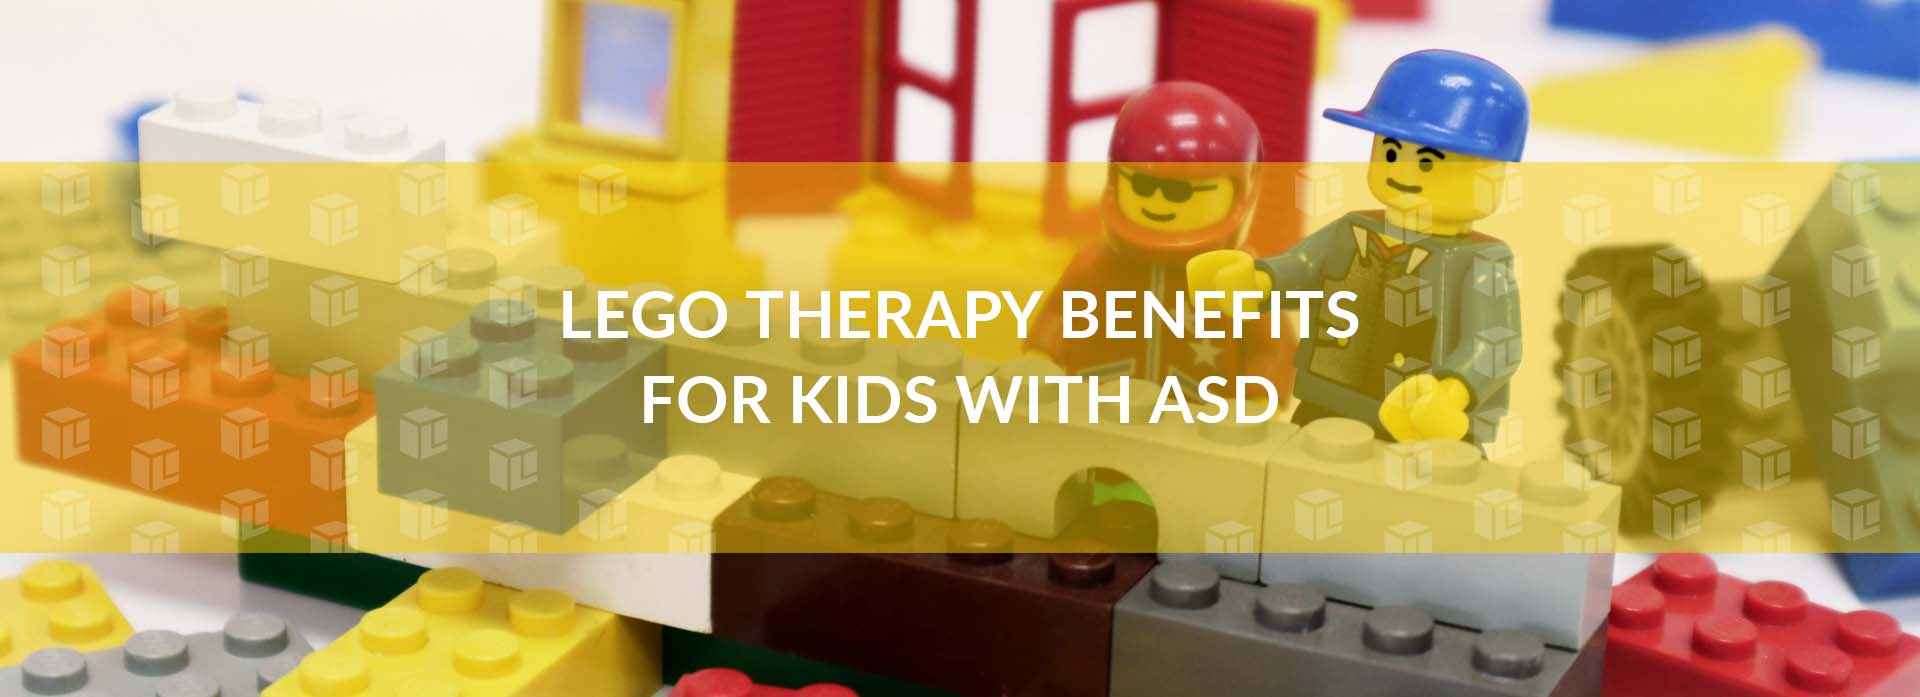 LEGO Therapy Benefits For Kids With ASD